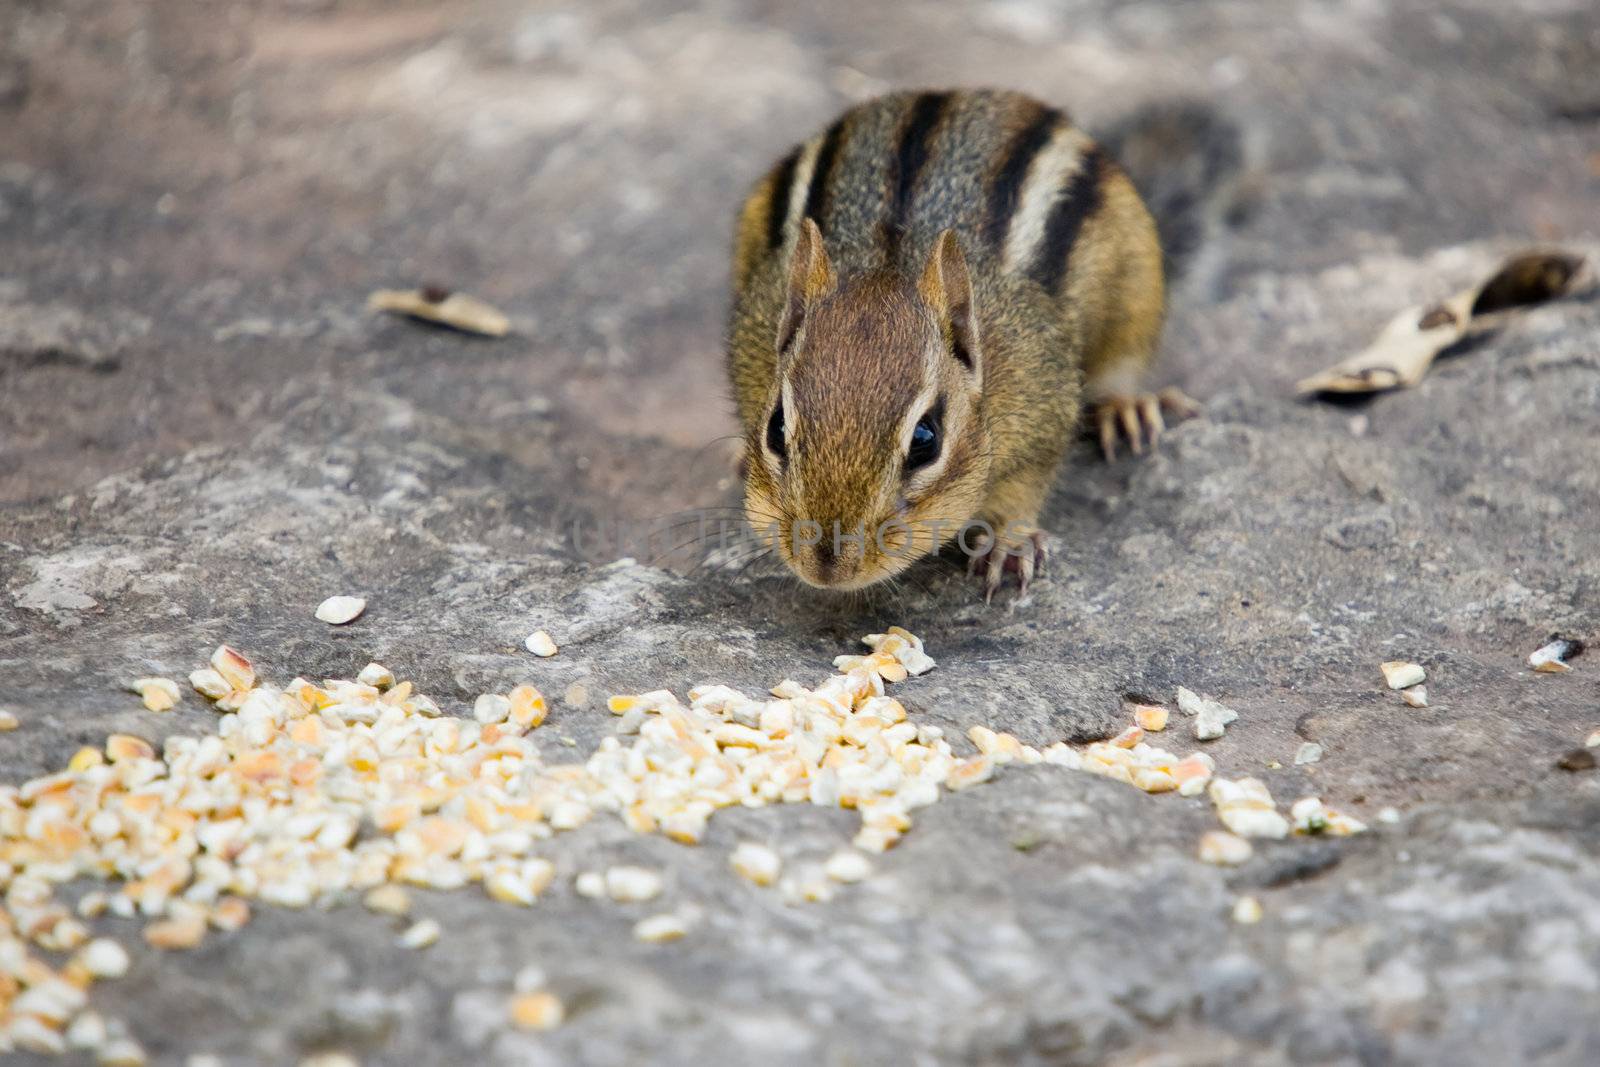 A baby chipmunk sitting on a slab of rock, about to gorge himself on a pile of dried corn.